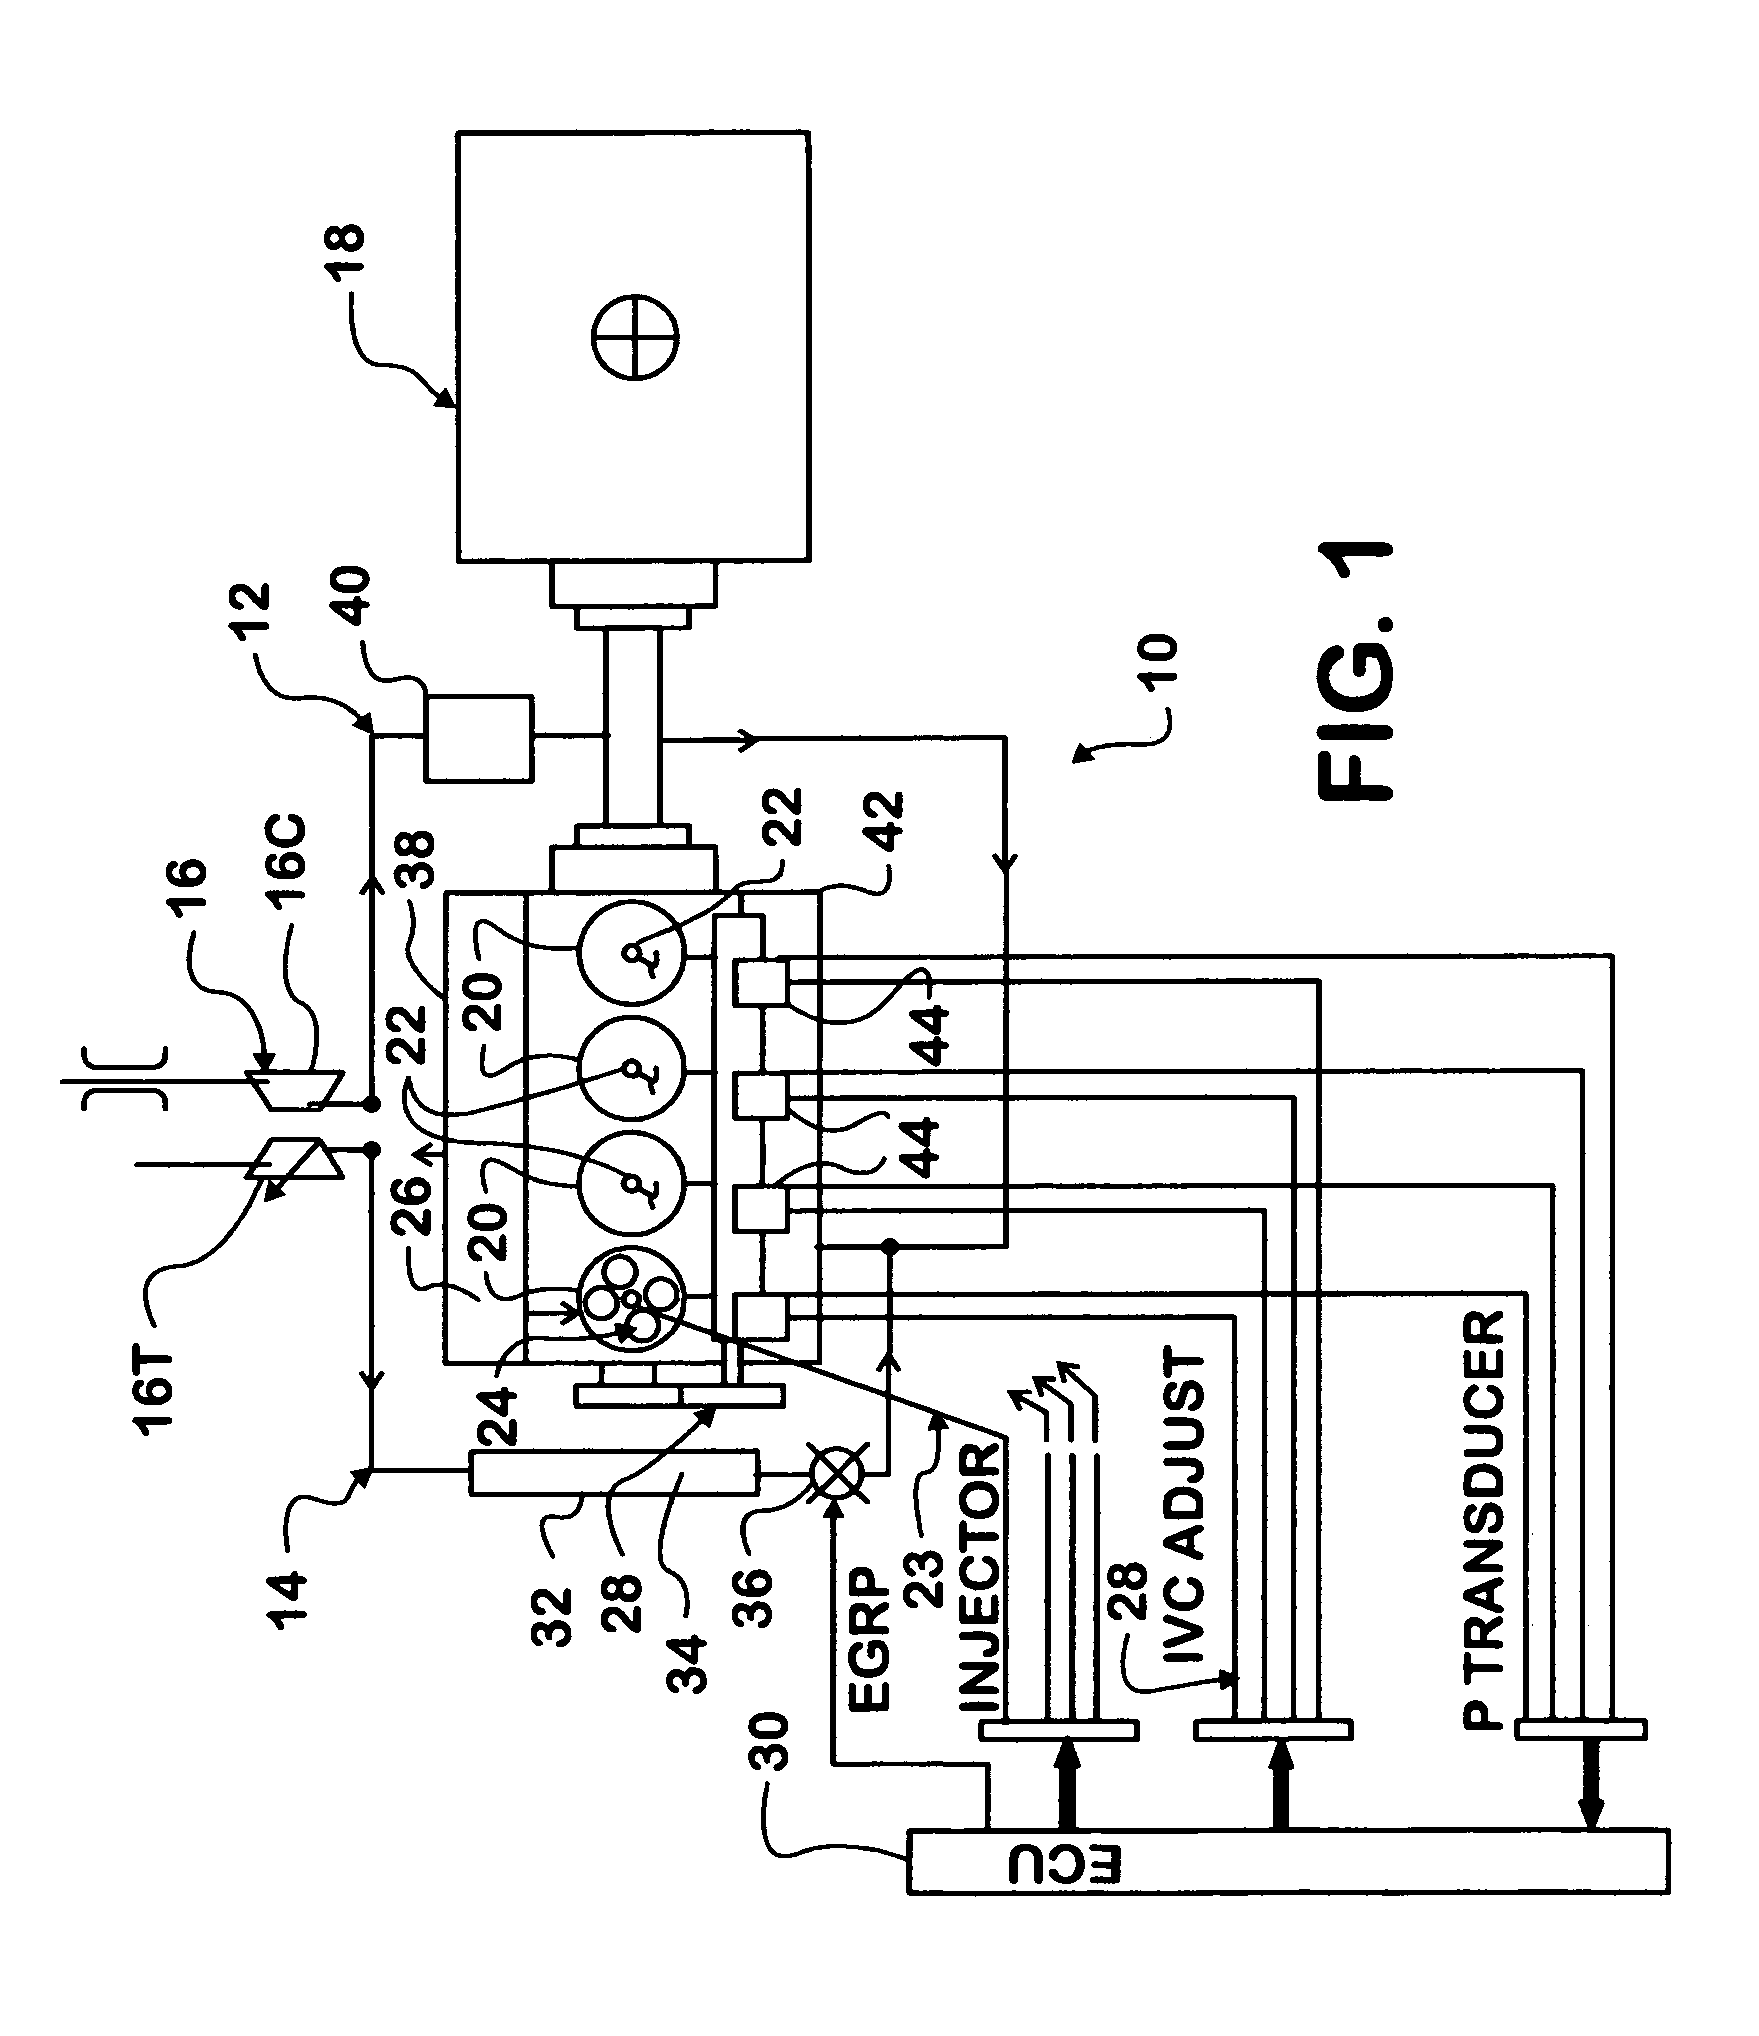 Model-based controller for auto-ignition optimization in a diesel engine